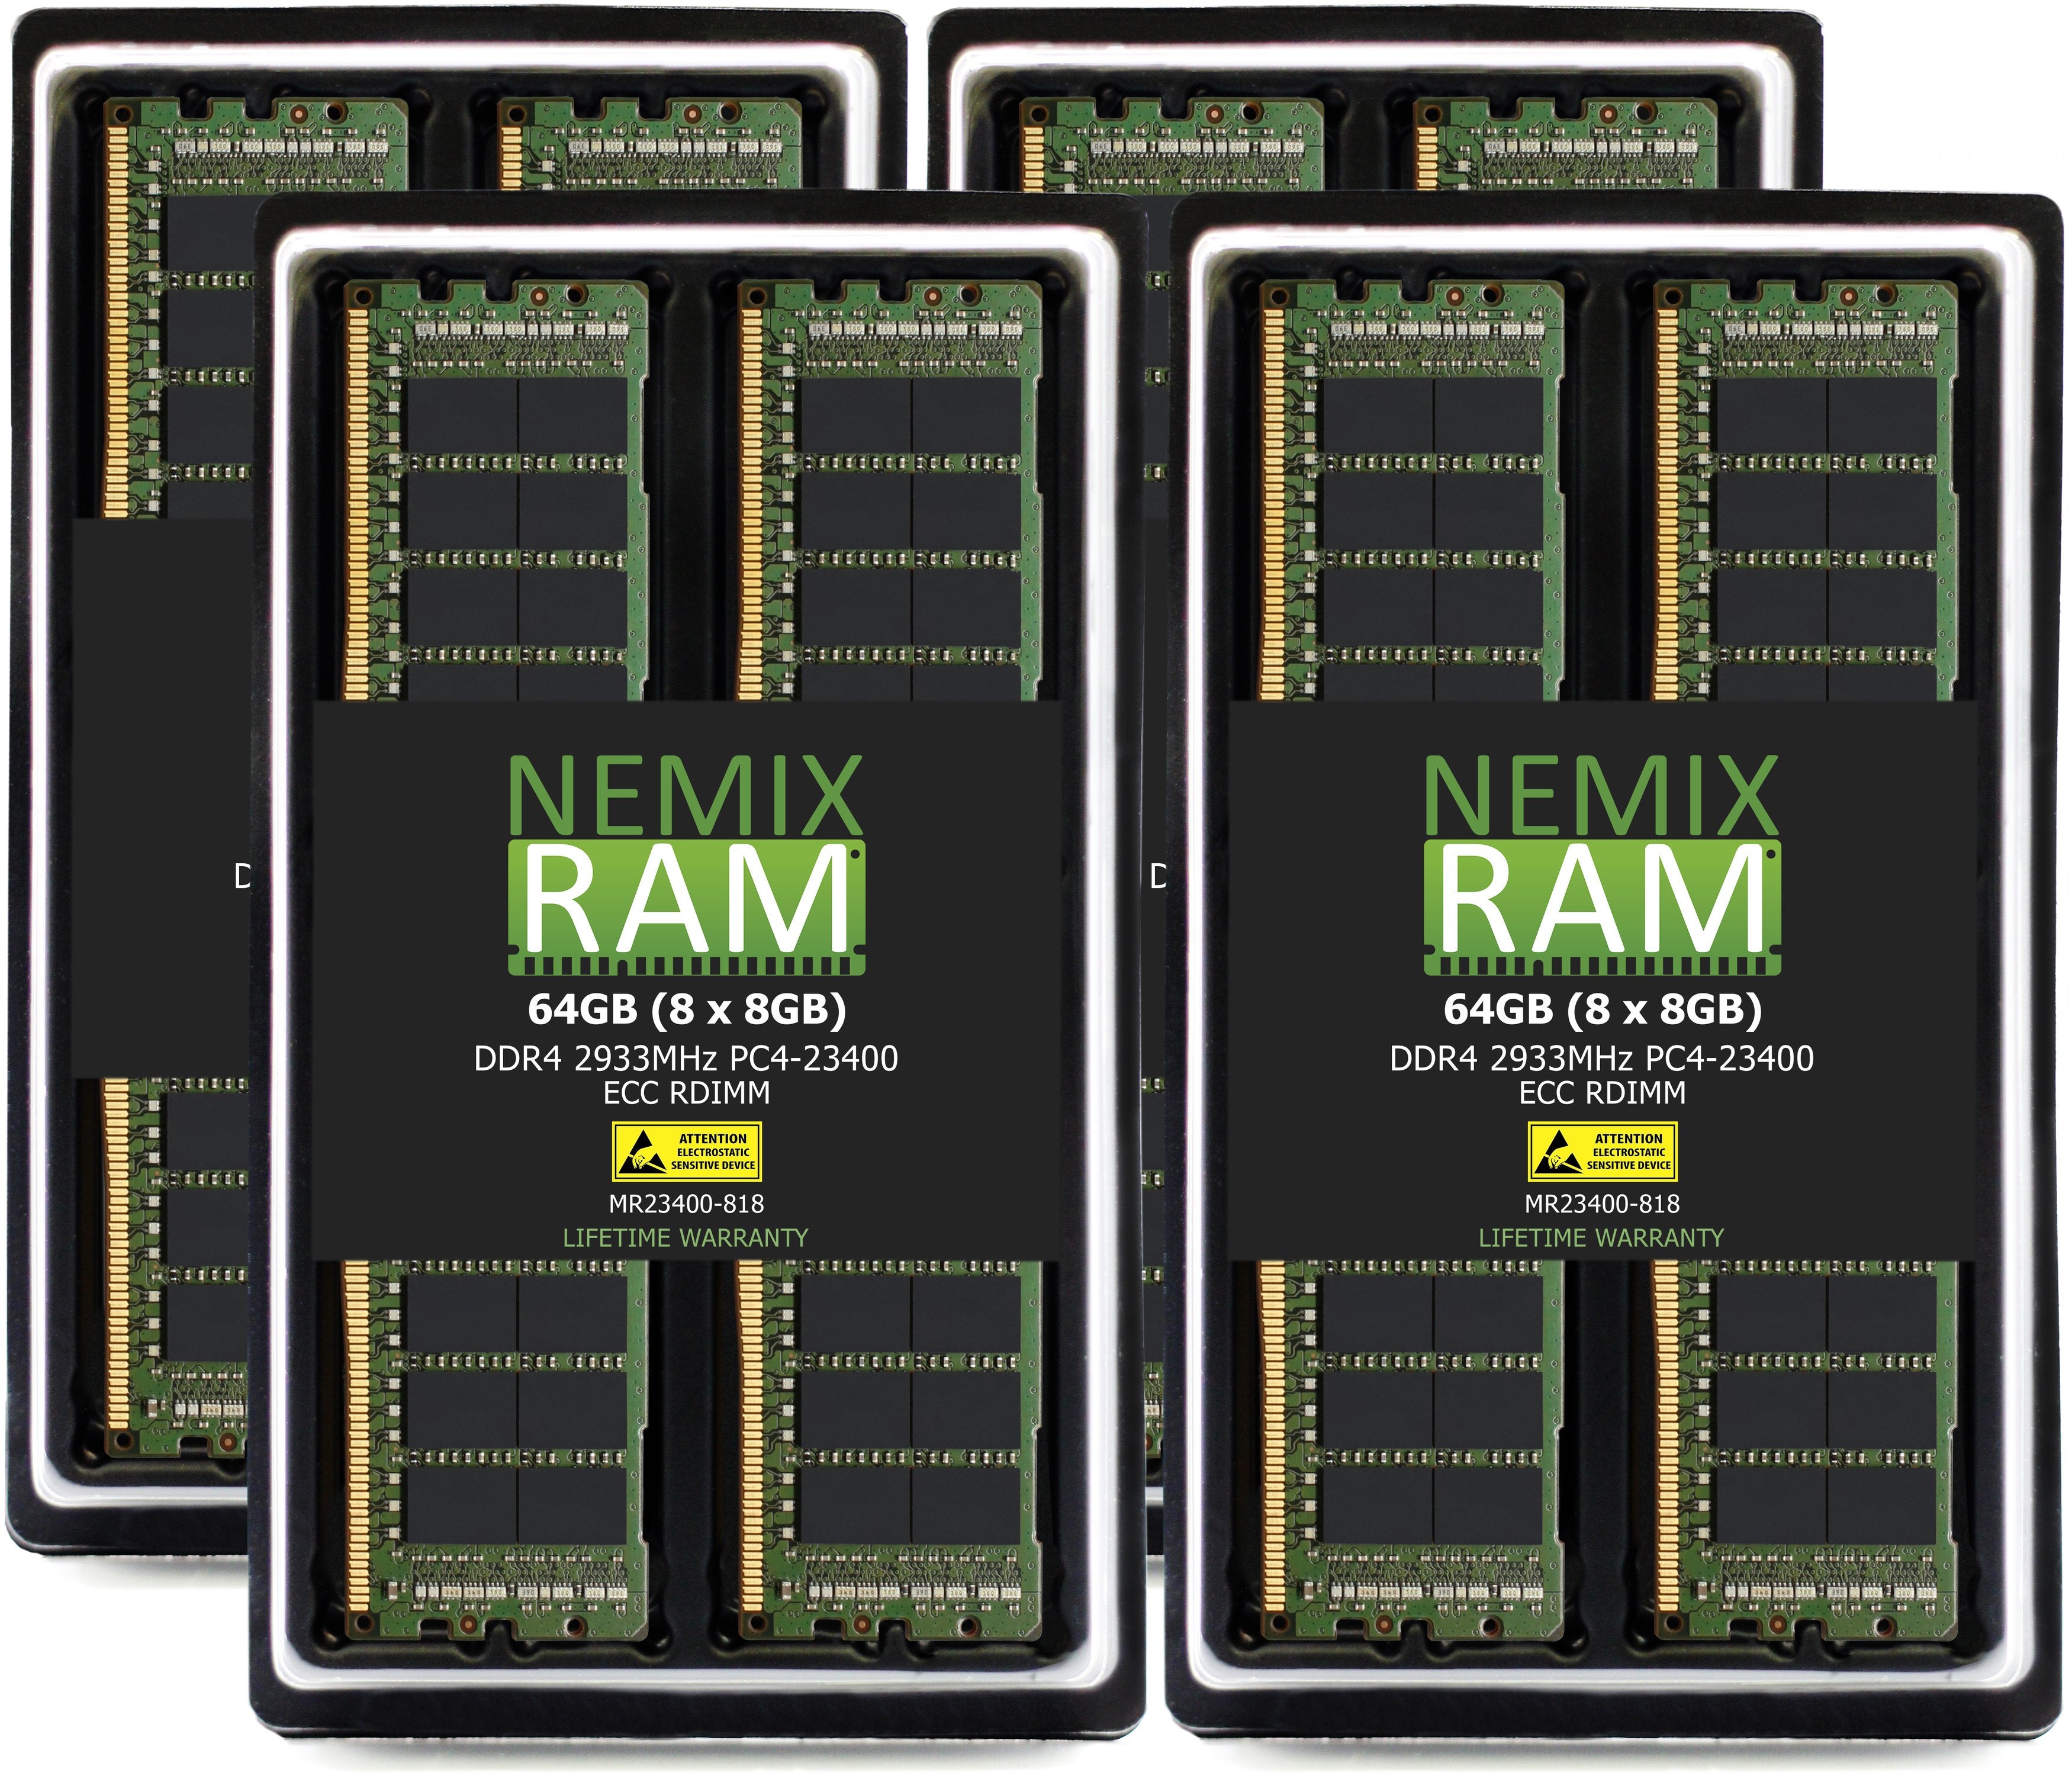 DDR4 2933MHZ PC4-23400 RDIMM for Apple Mac Pro Rack 2020 7,1